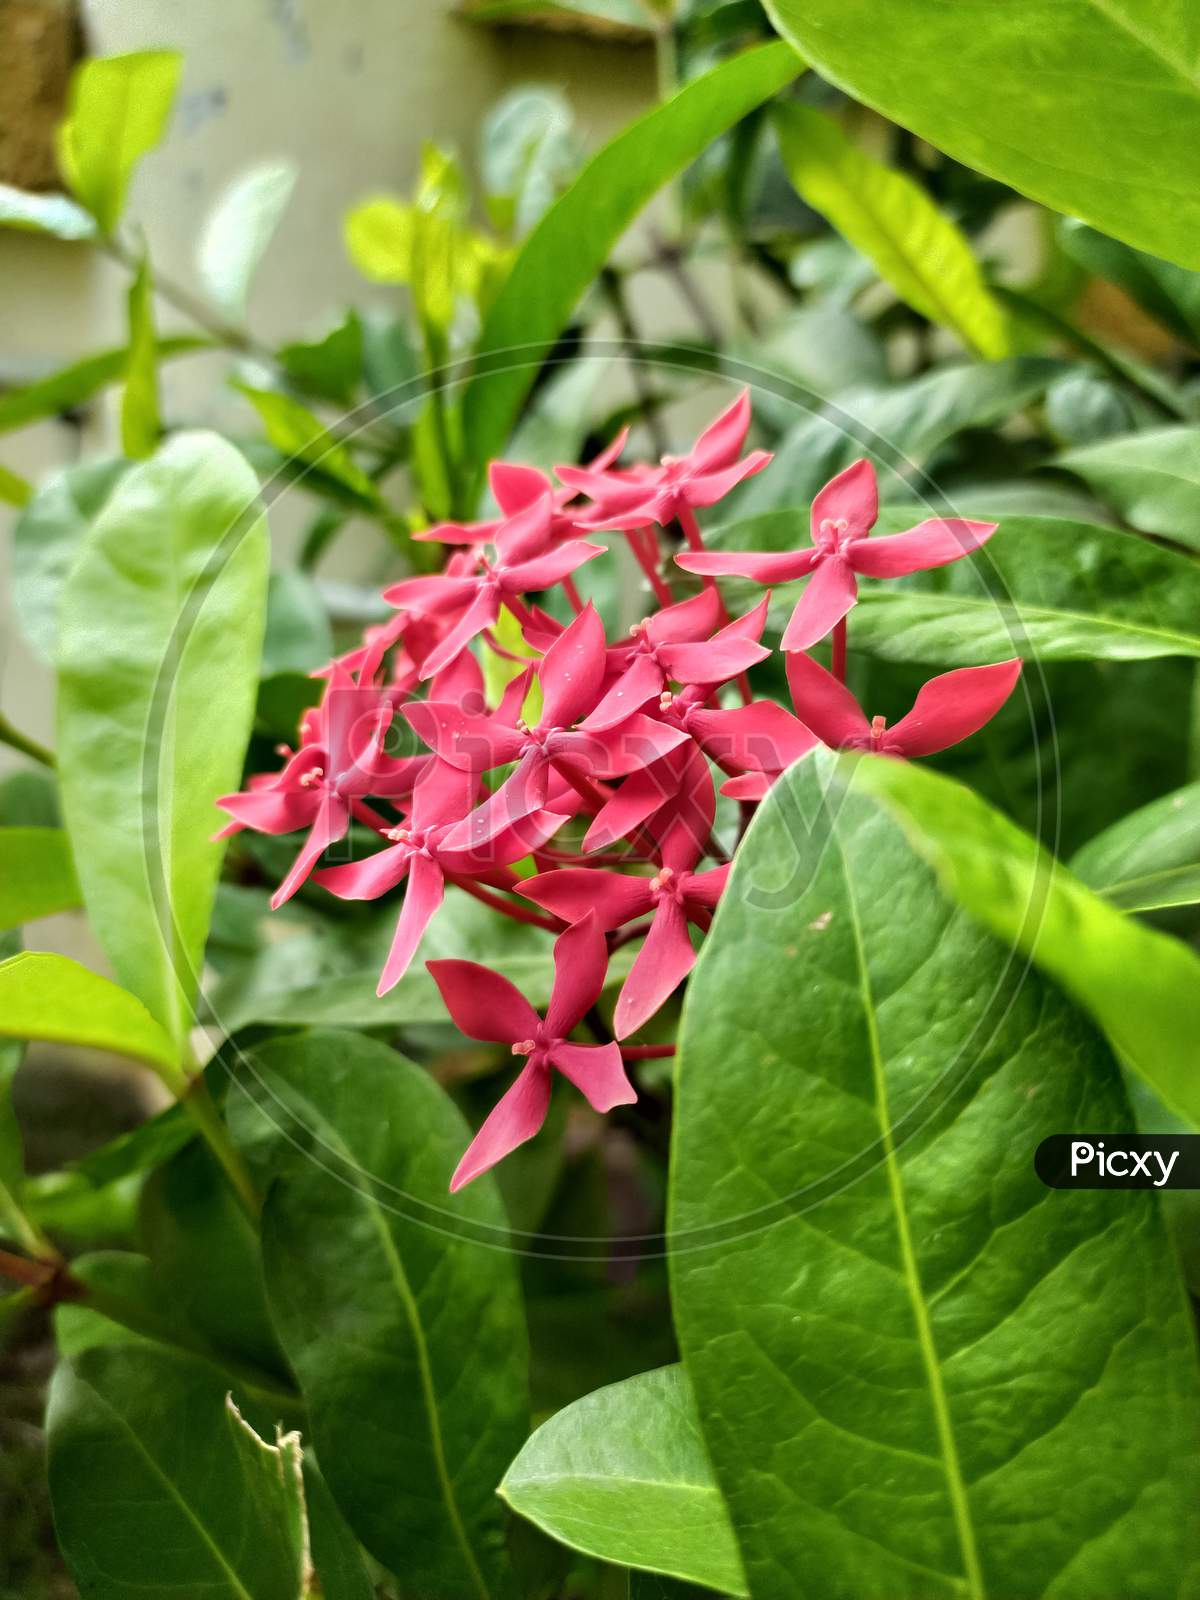 Beautiful Red flowers green leaves, Closeup image Red flower in garden, natural flowers garden most beautiful Red flower and leaf, God created beautiful world.